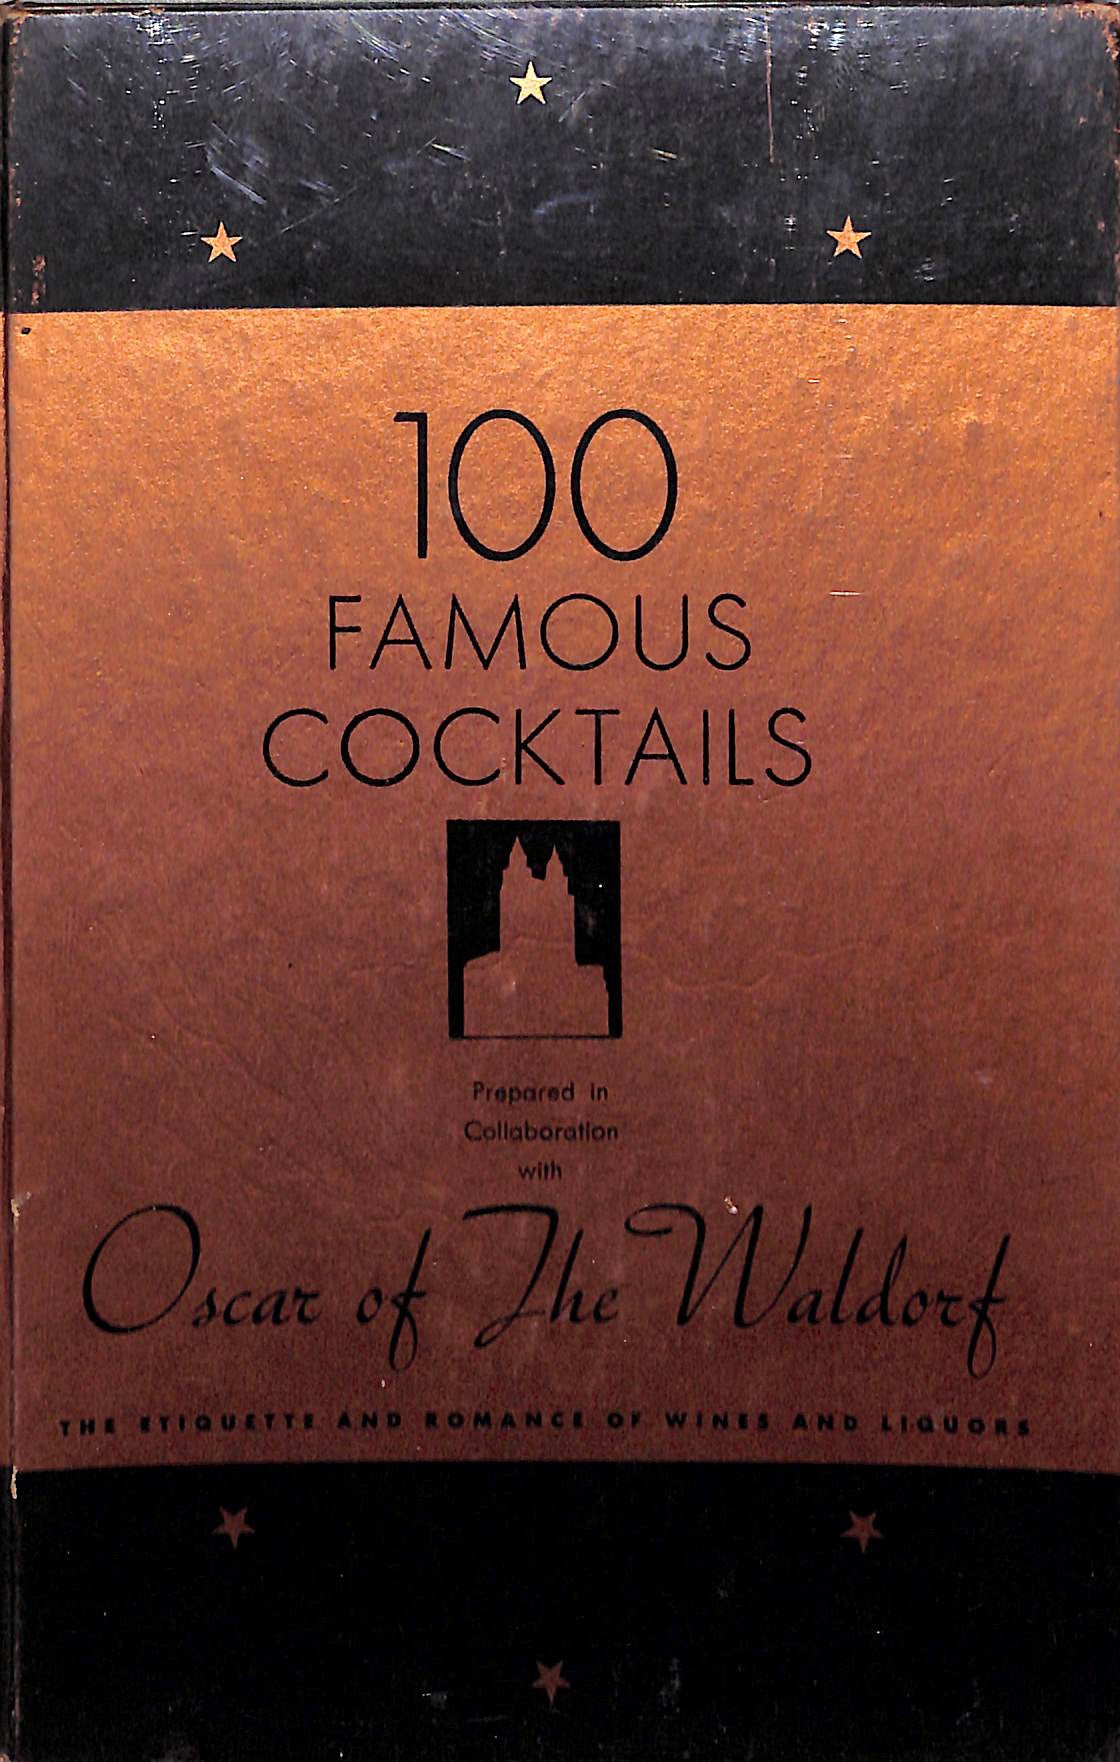 "100 Famous Cocktails" Oscar Of The Waldorf 1934